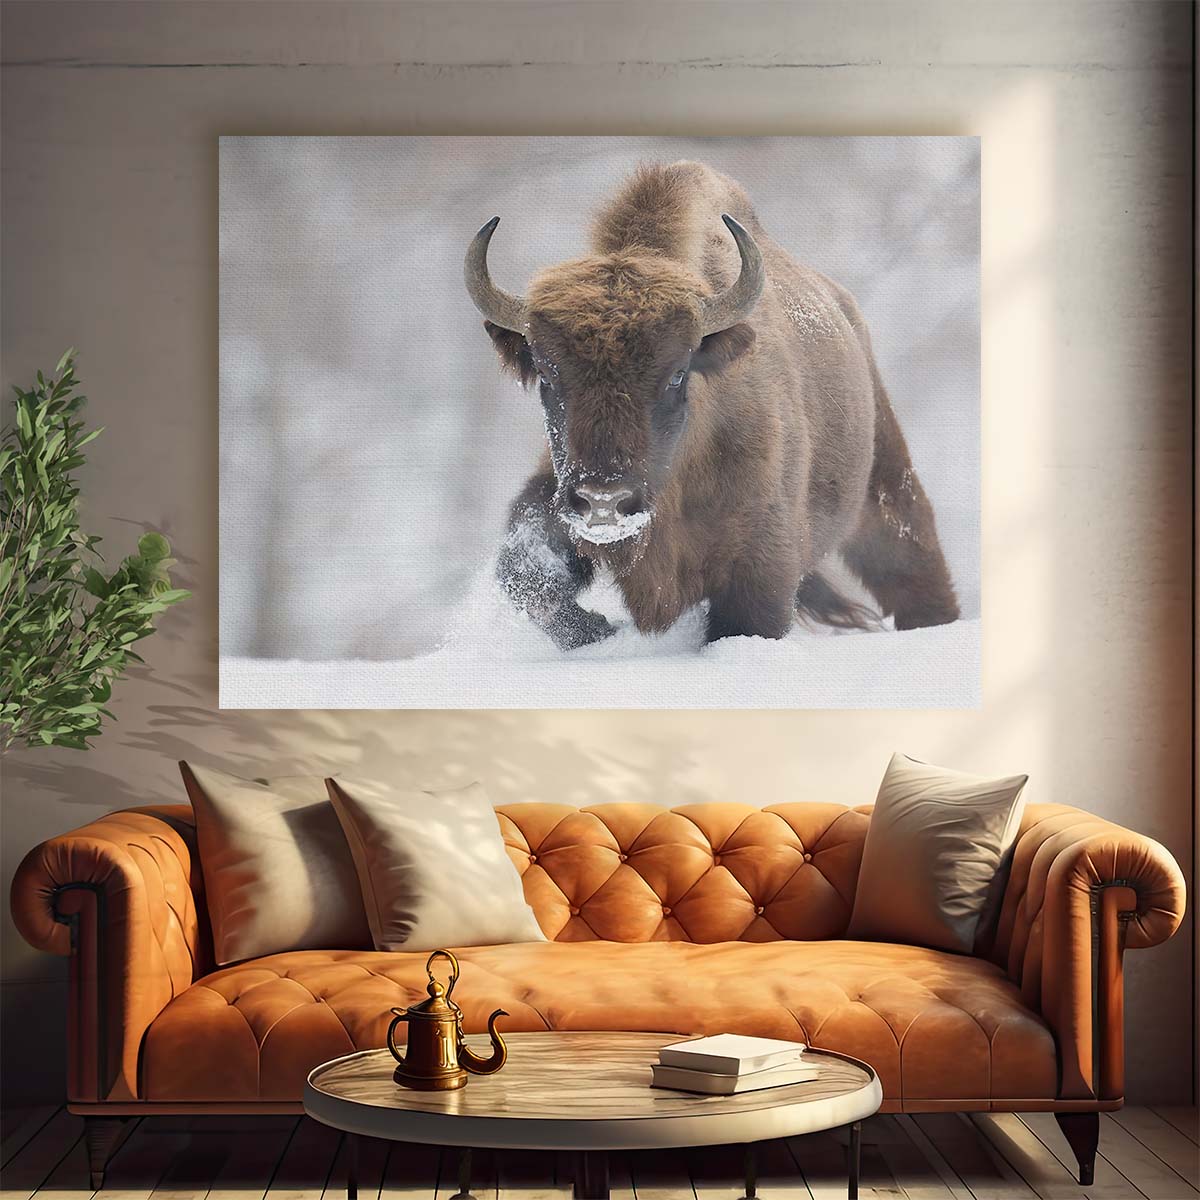 Majestic Snowy Bison in Winter Wilderness Wall Art by Luxuriance Designs. Made in USA.